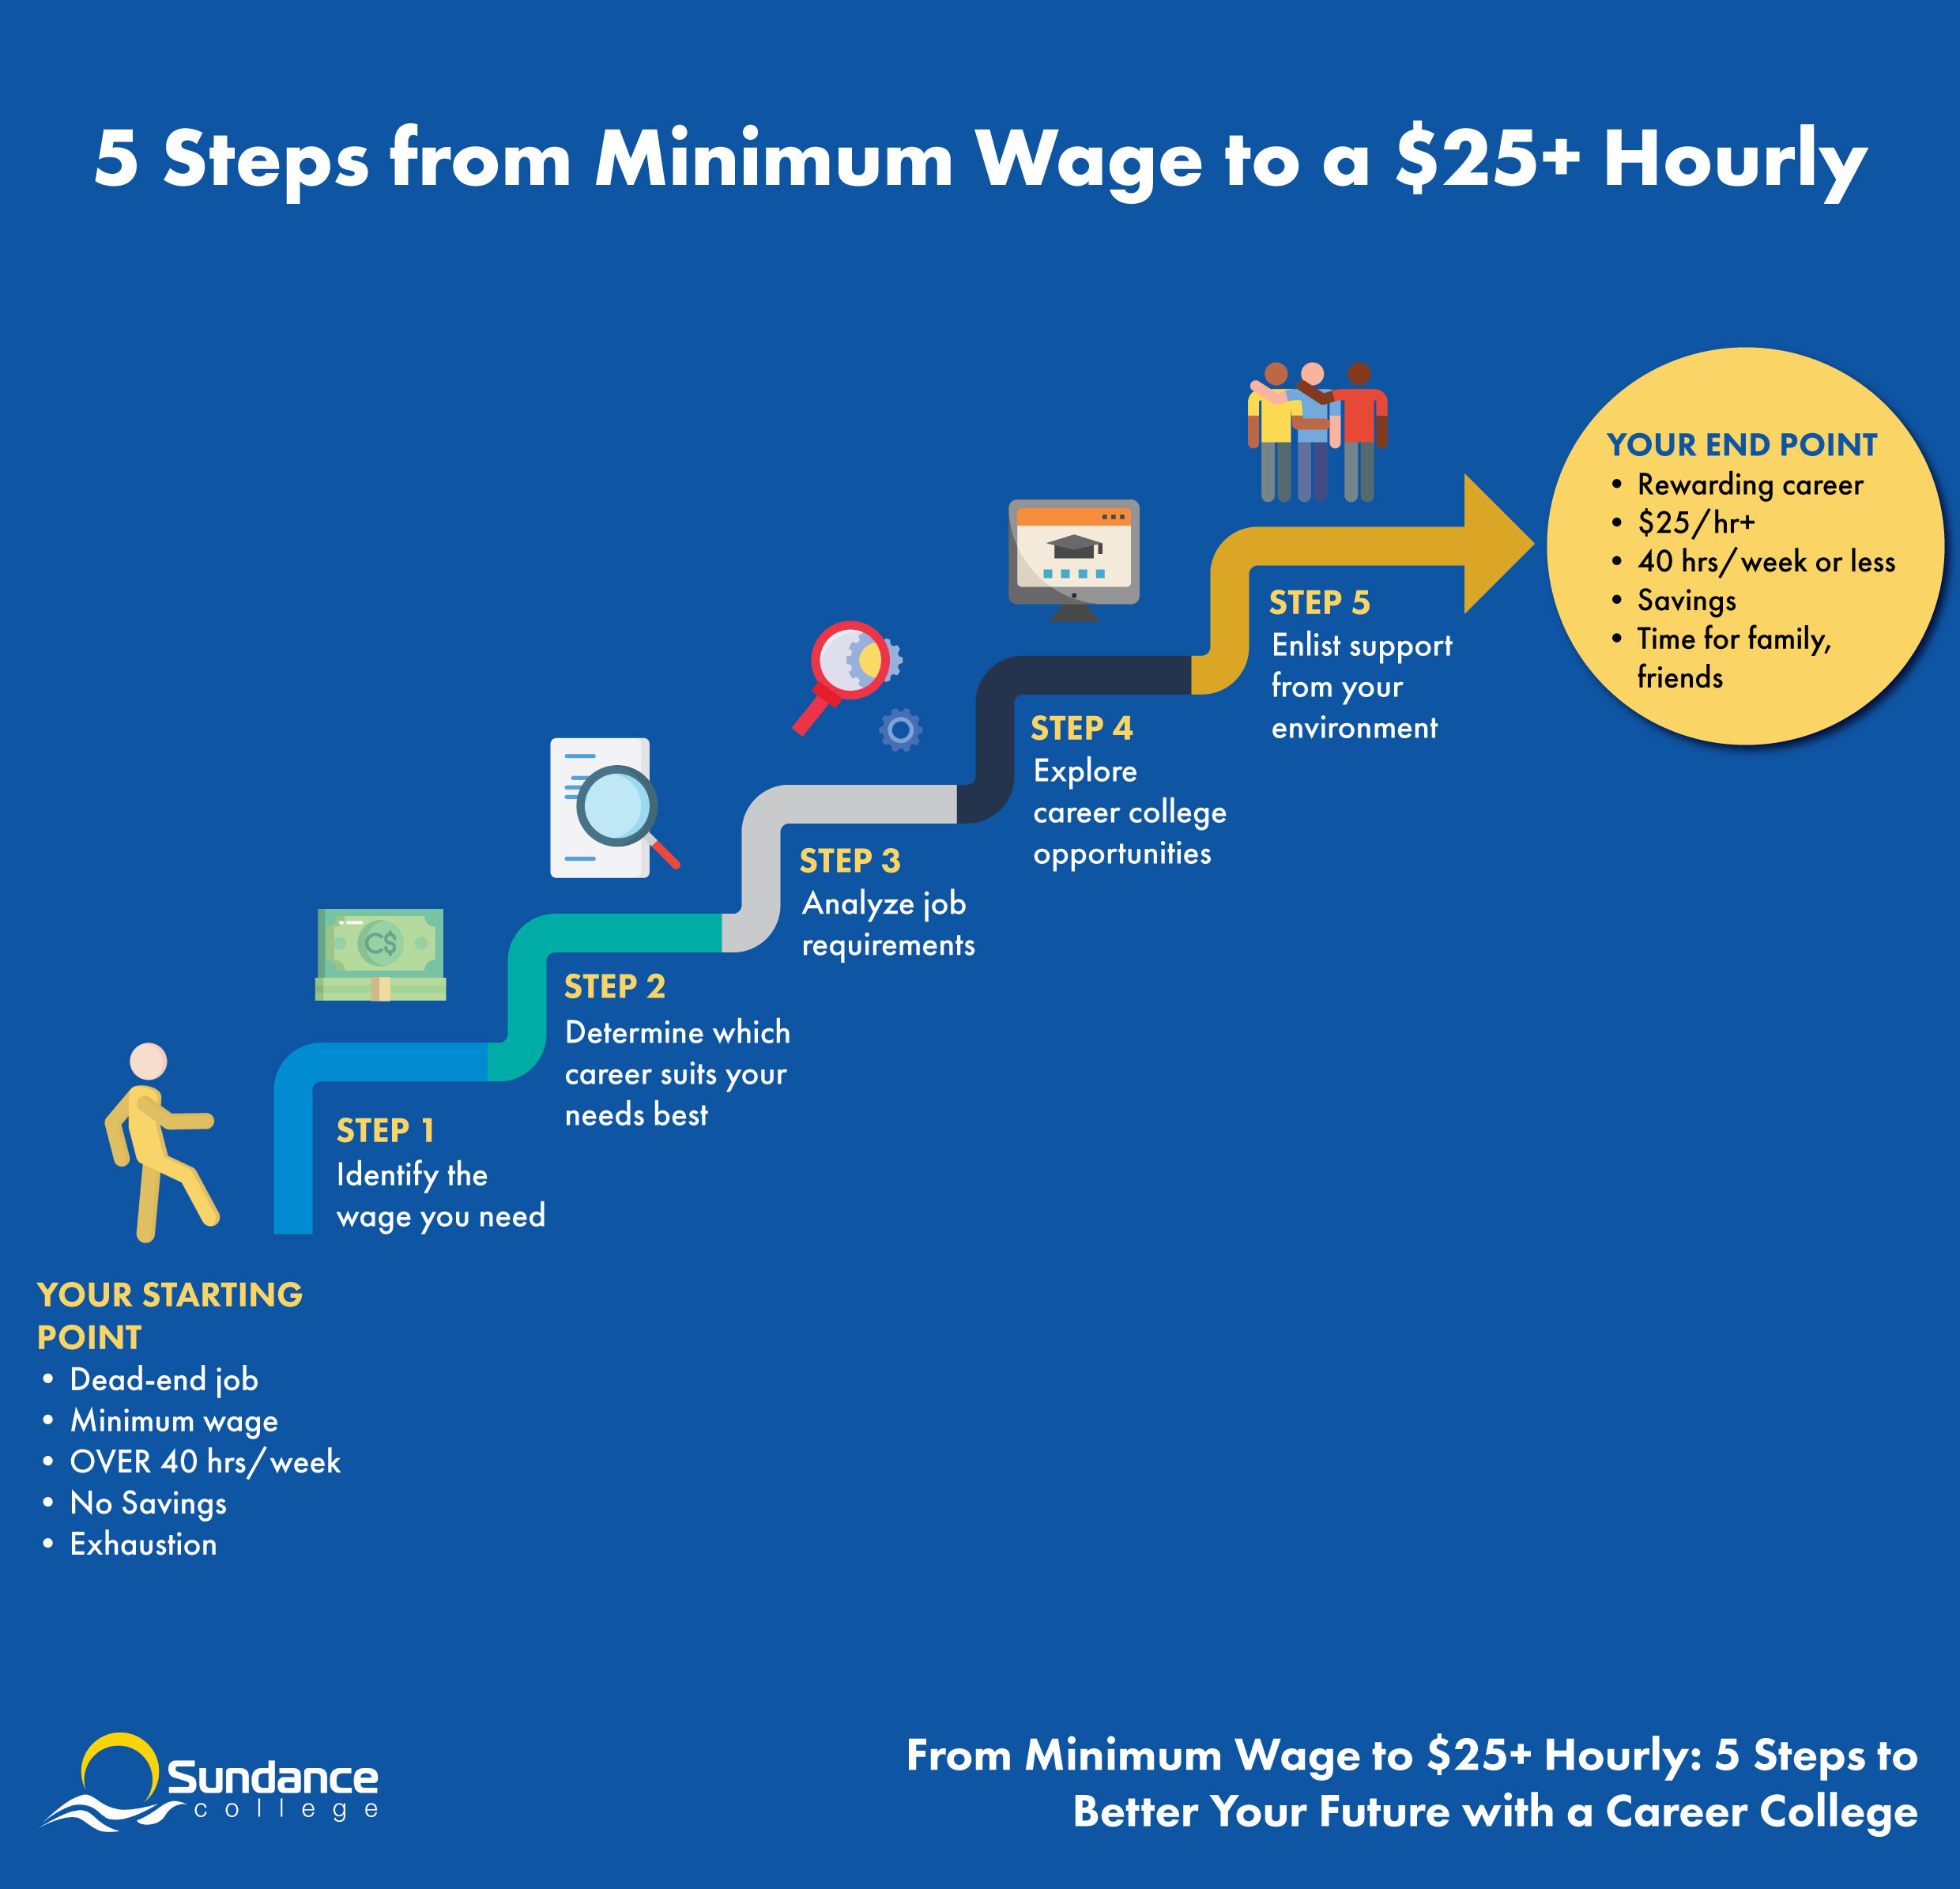 Infographic made by Sundance College that showcases five steps from minimum wage to $25+ hourly including Step 1: Identify the wage you need; Step 2: Determine which career suits your needs best; Step 3: Analyze job requirements; Step 4: Explore career college opportunities; Step 5: Enlist support from your environment.